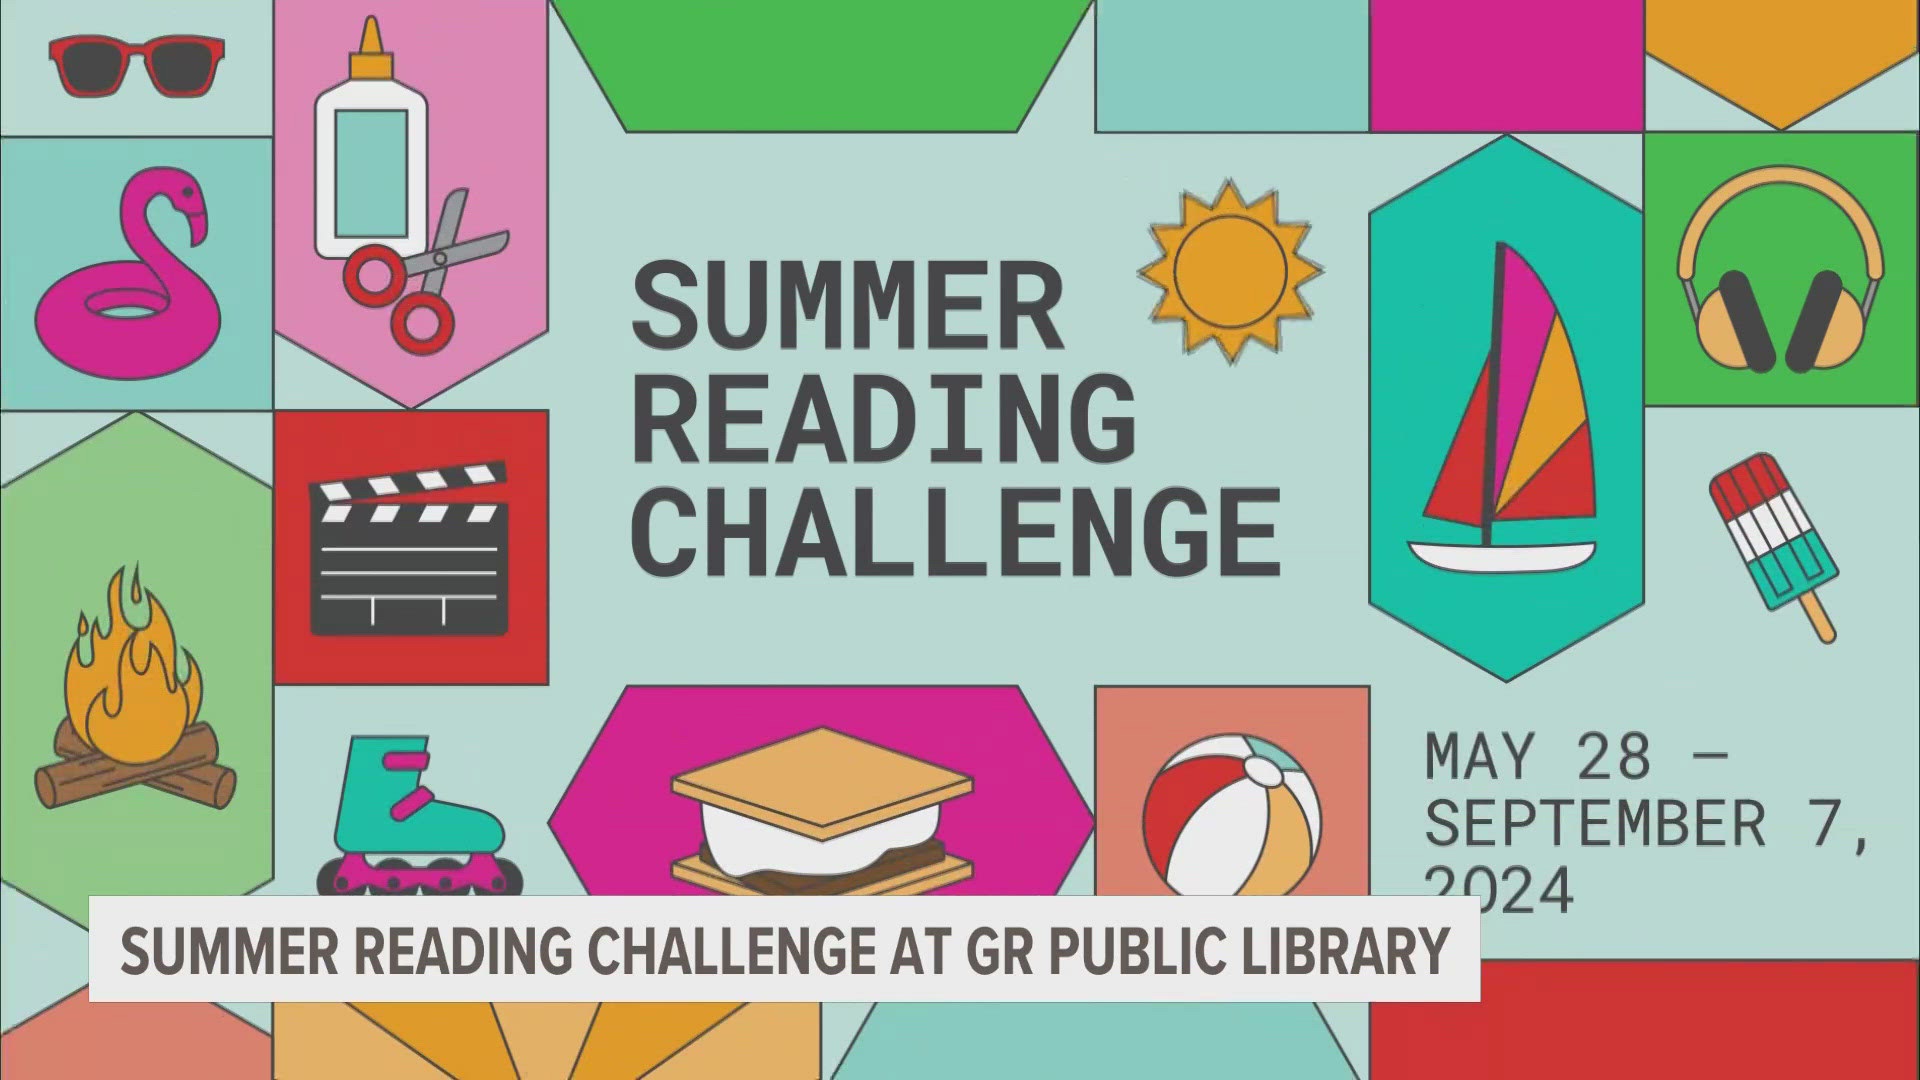 From May 28 through Sept. 7, the free challenge aims to engage readers from every walk of life.